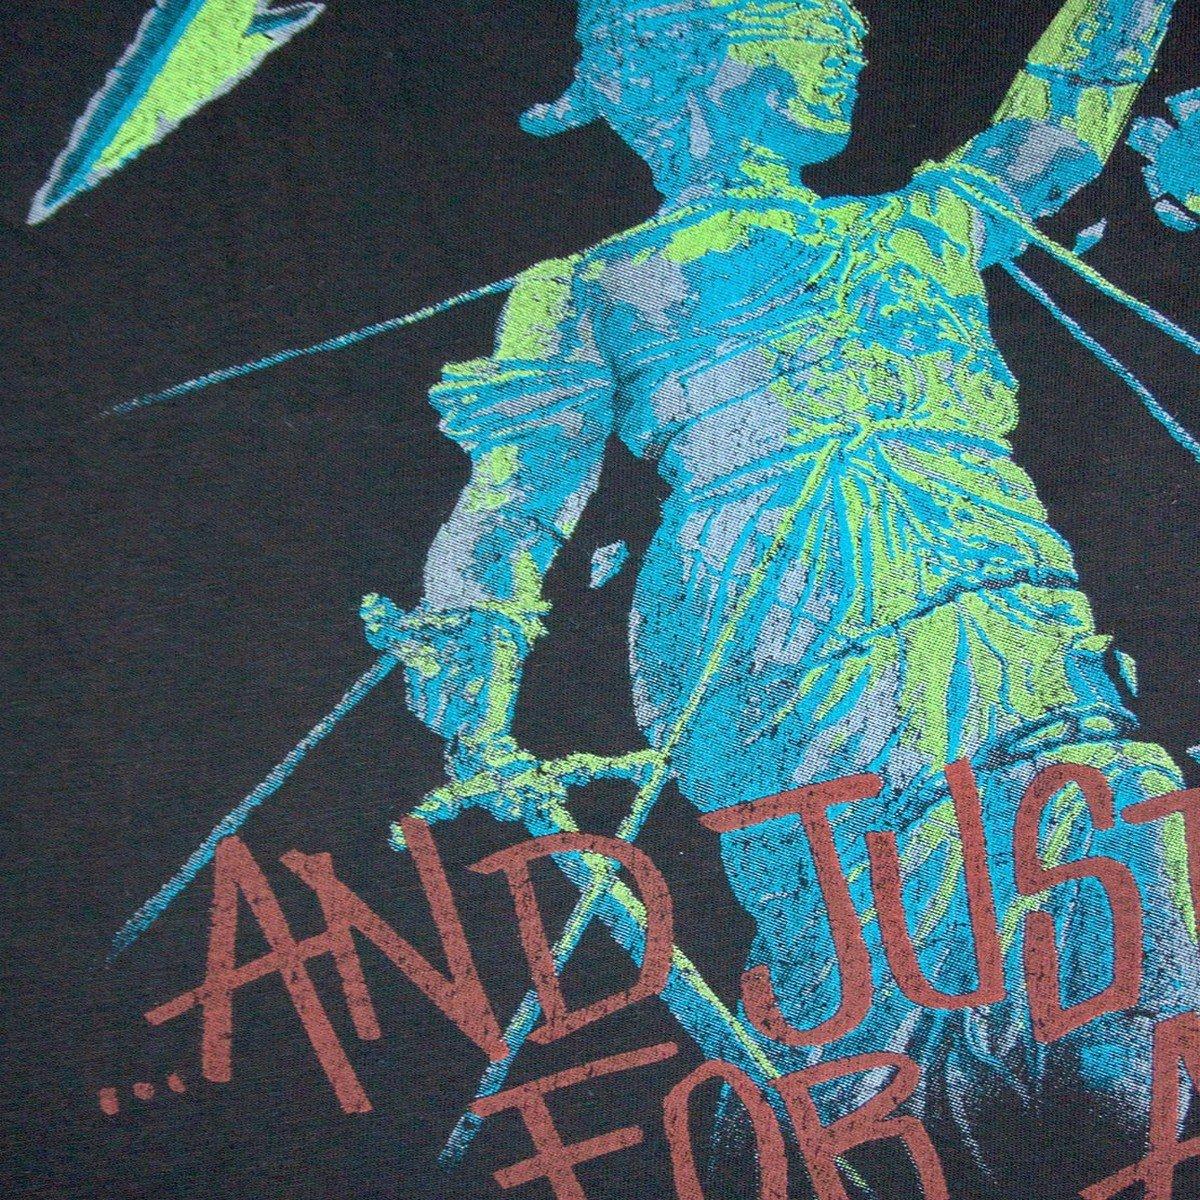 Amplified  "Justice For All" TShirt 